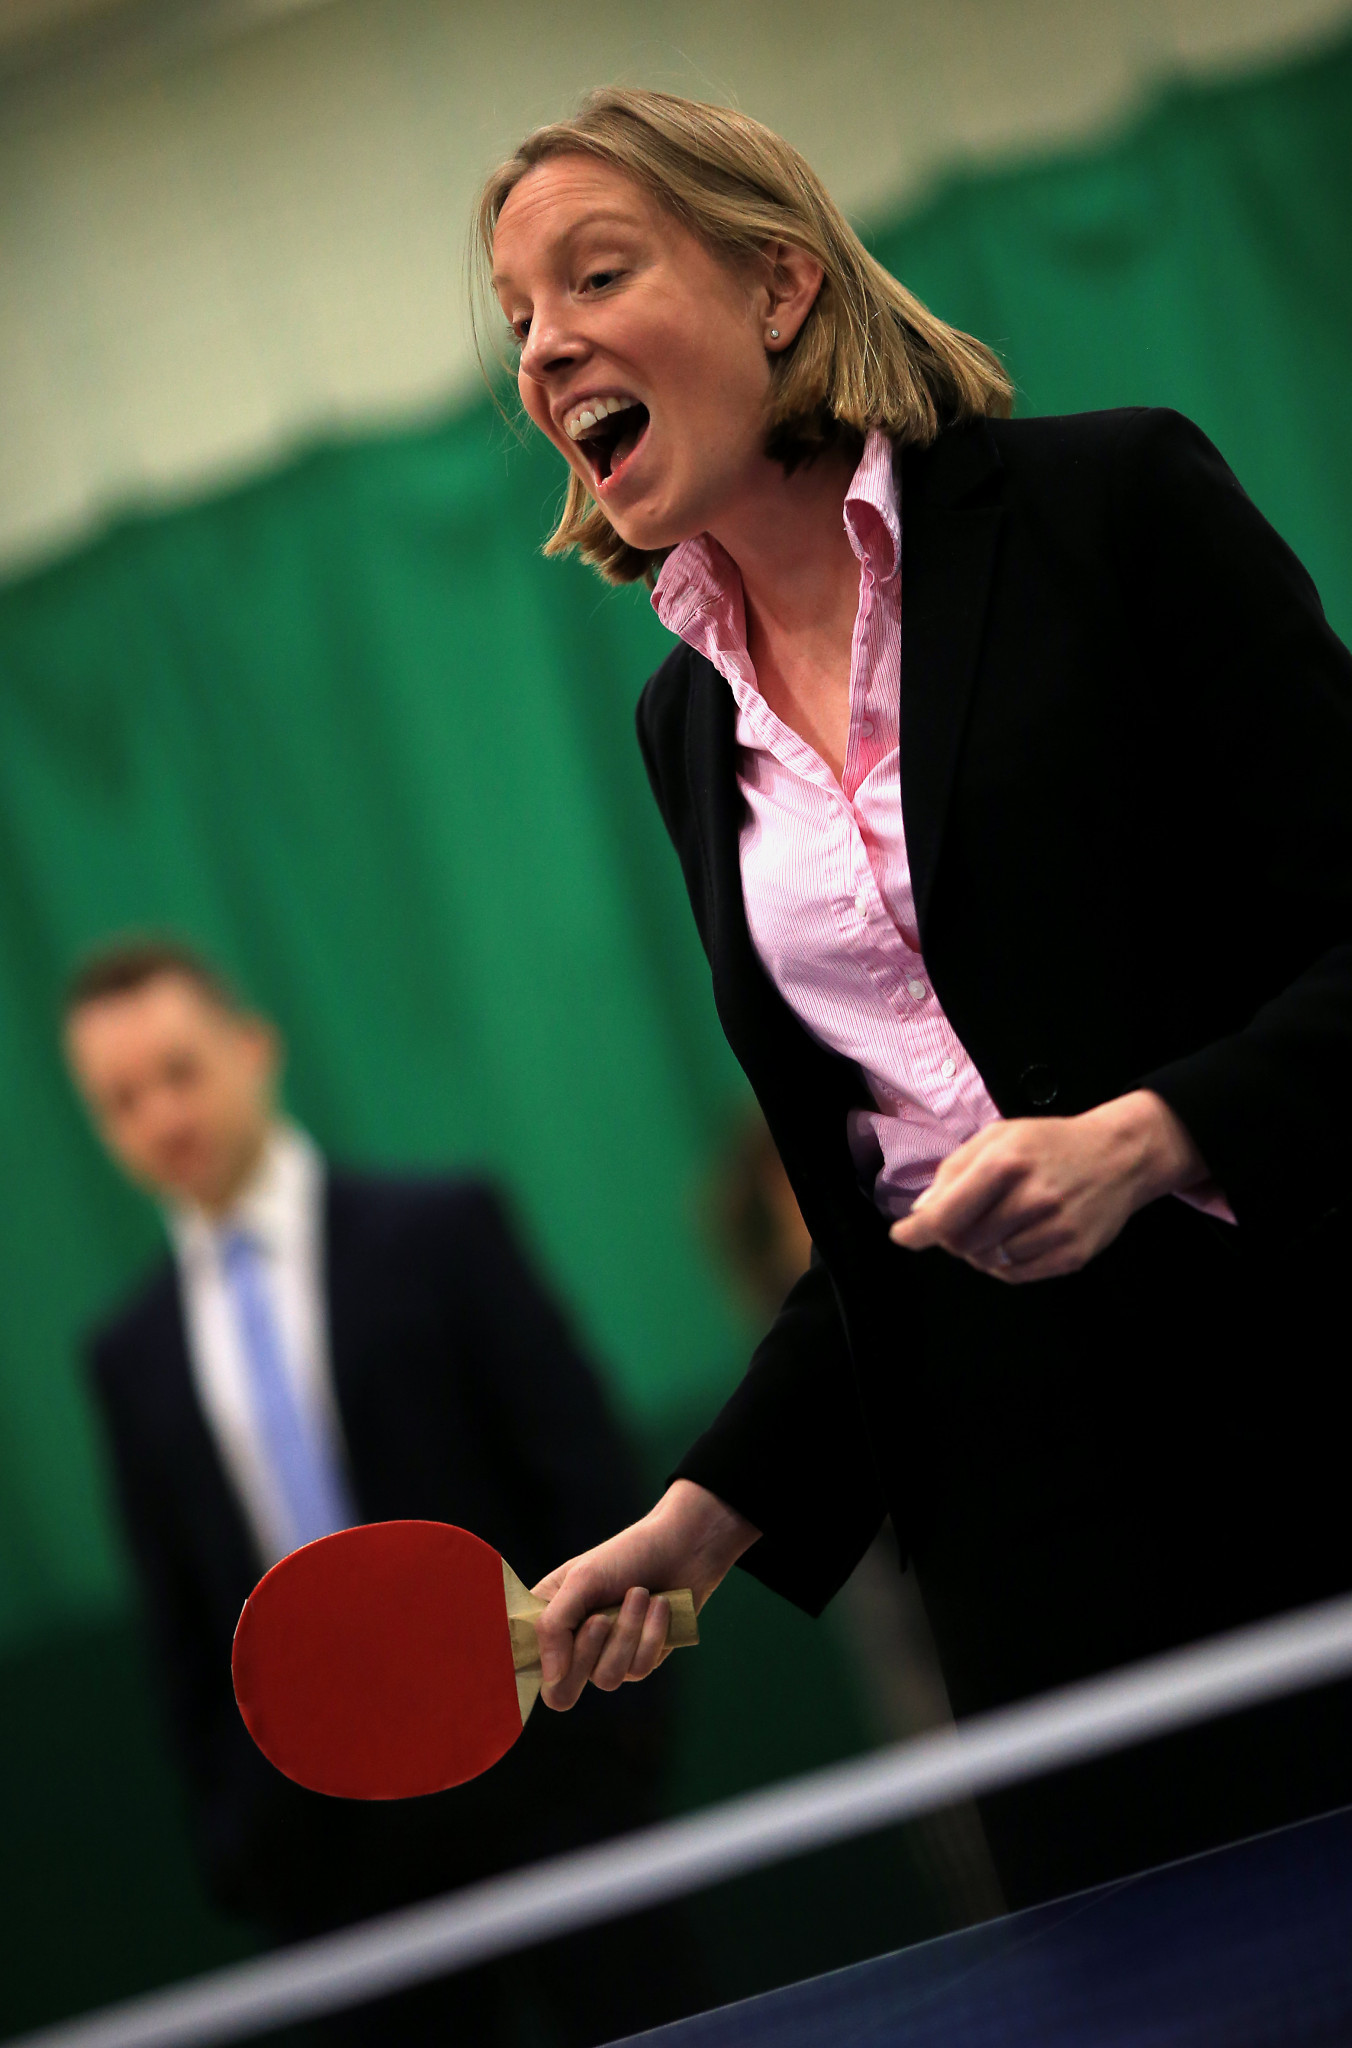 Tracey Crouch resigned as UK's Sports Minister in a row over fixed-odds betting terminals ©Getty Images